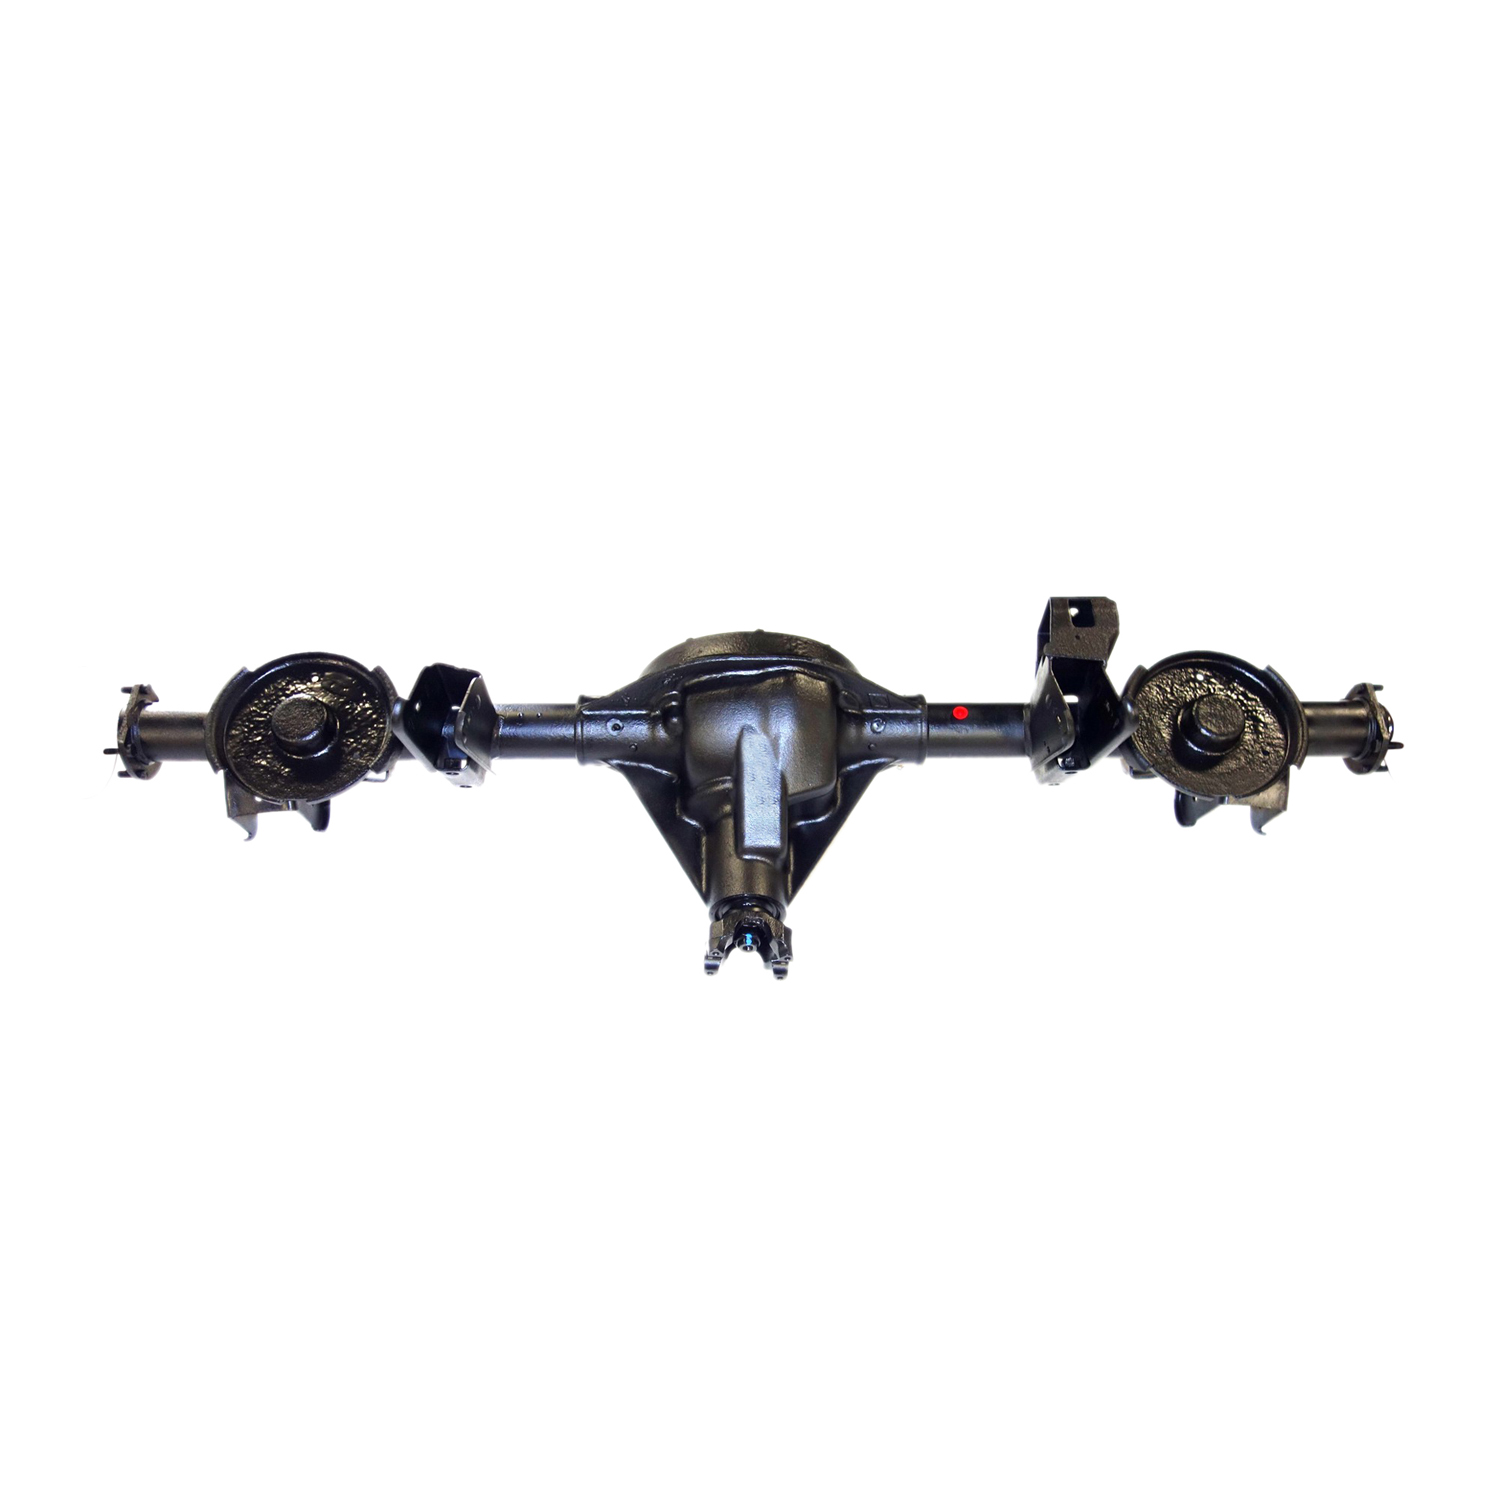 Remanufactured Complete Axle Assembly for Dana 35 90-95 Wrangler 4.11 w/o ABS, Posi LSD